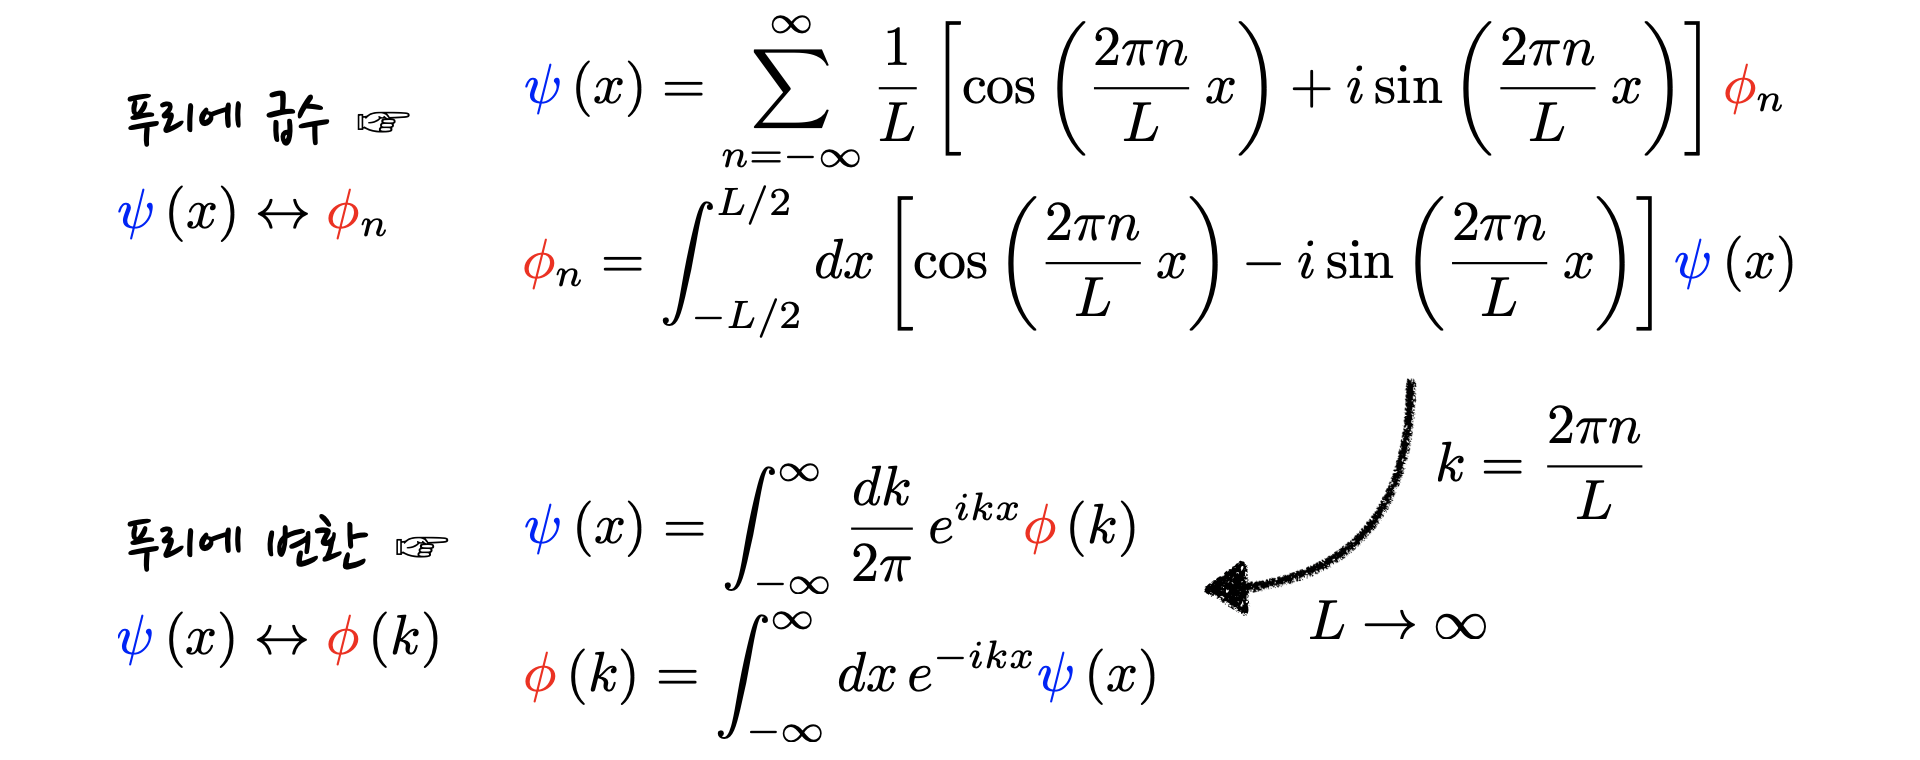 definitions of Fourier series and transformation